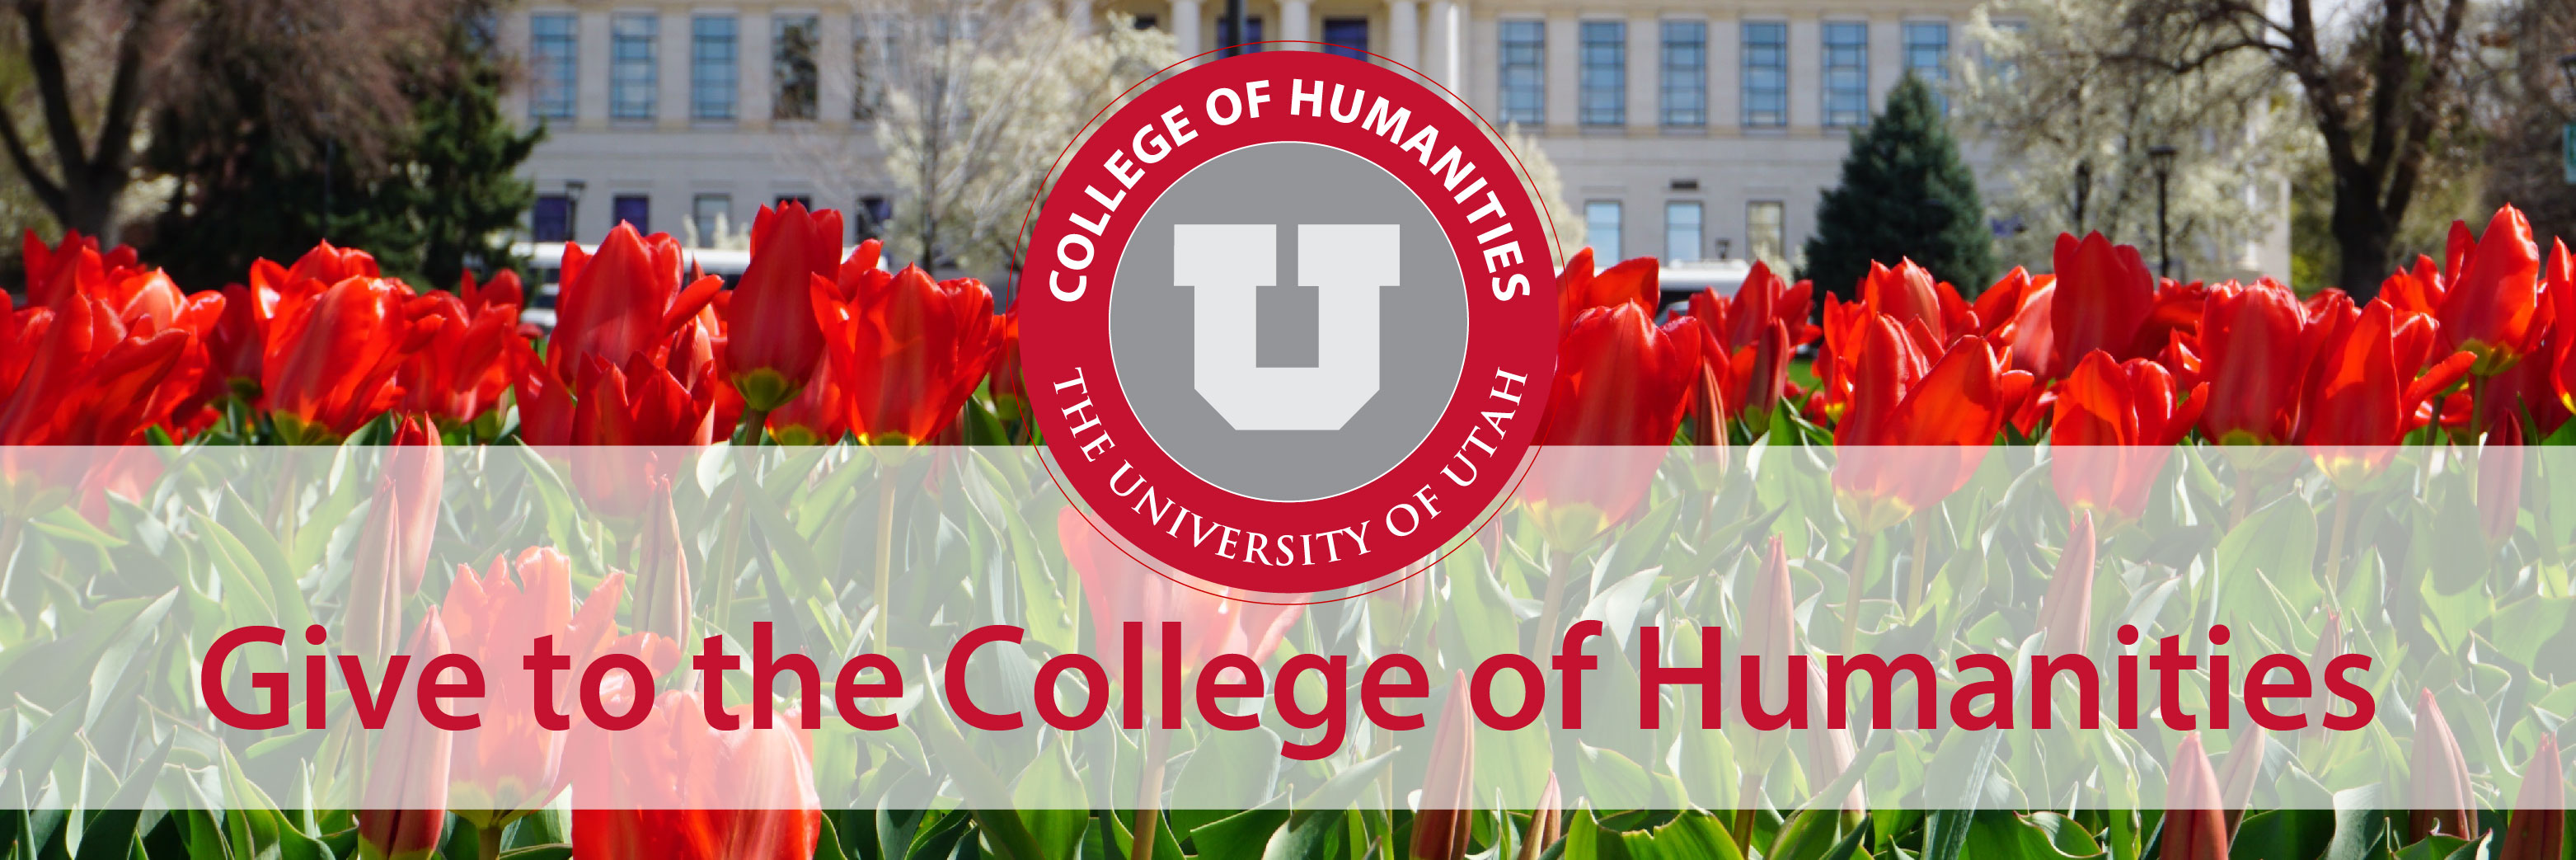 Give to the College of Humanities